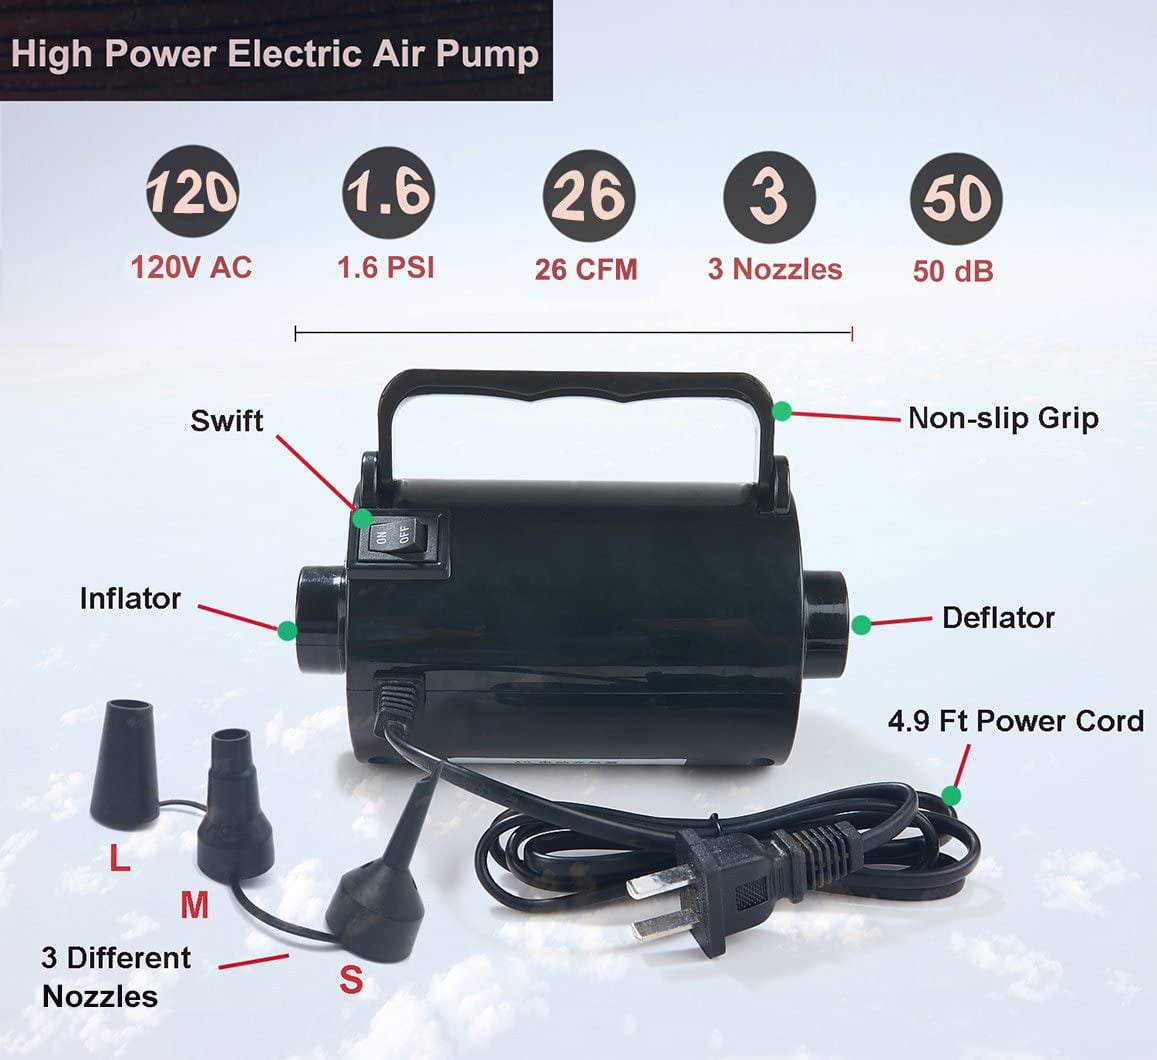 CISNO Electric Air Pump for Inflatables Air Mattress Toys Bed Lake Floats Rafts Pool Quick-Fill Portable Inflator/Deflator with 3 Nozzles 110V/150W 